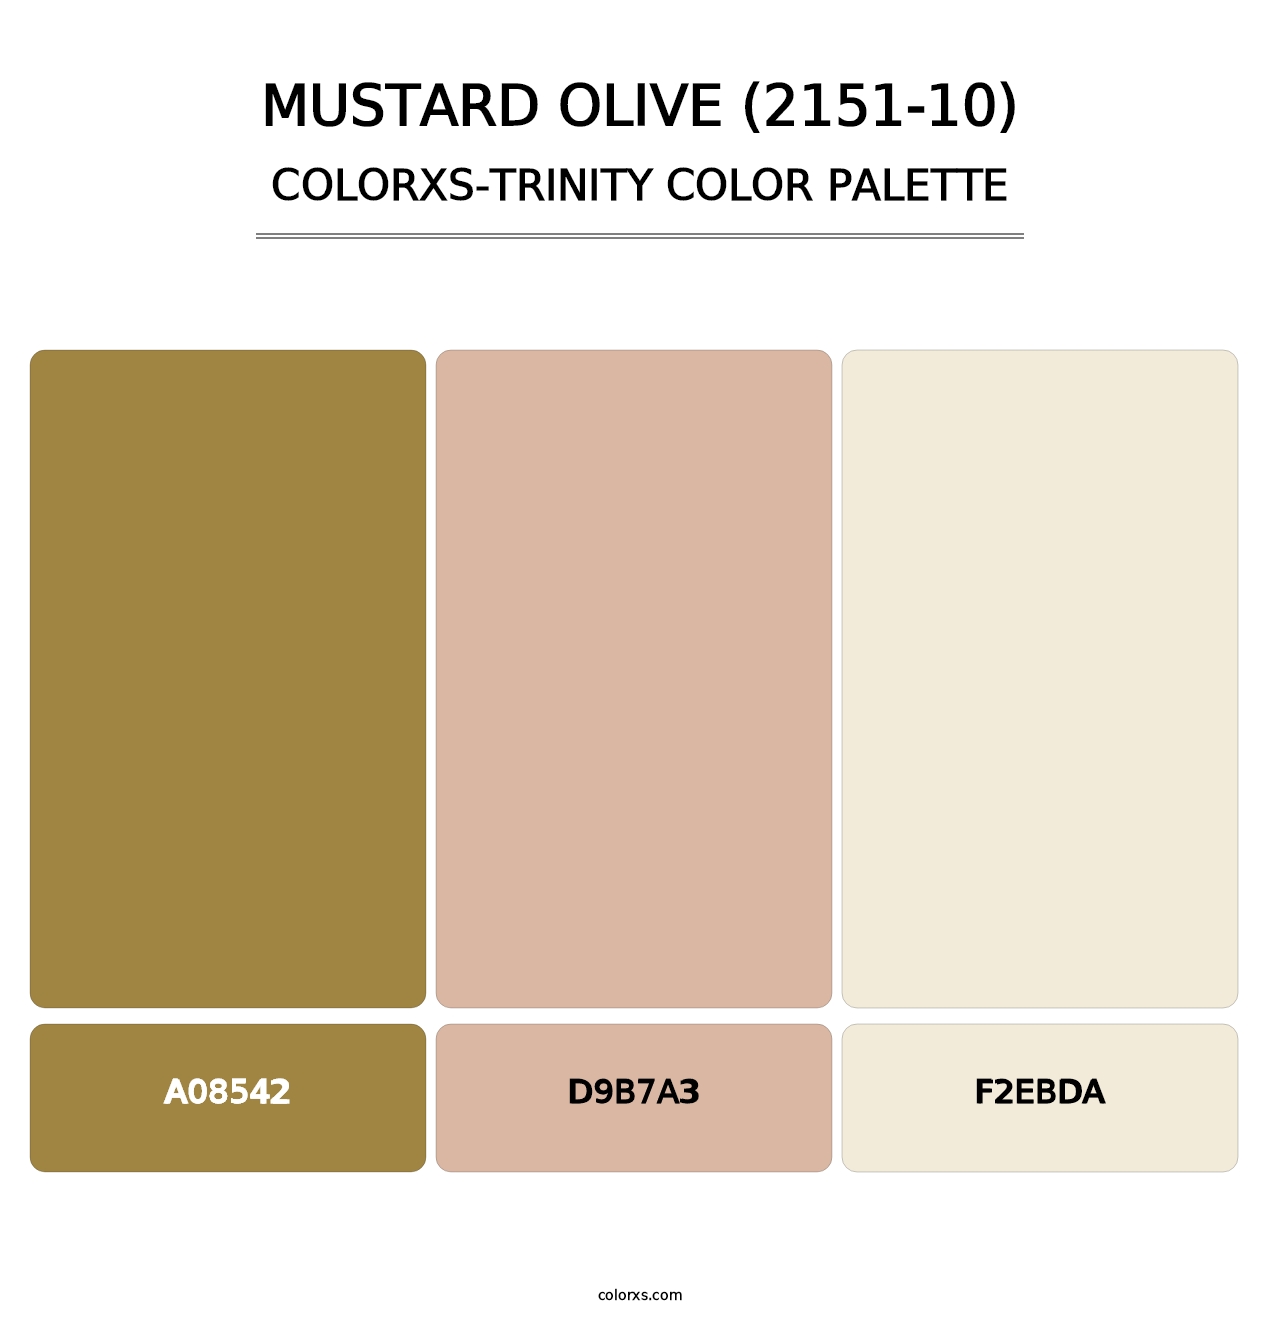 Mustard Olive (2151-10) - Colorxs Trinity Palette